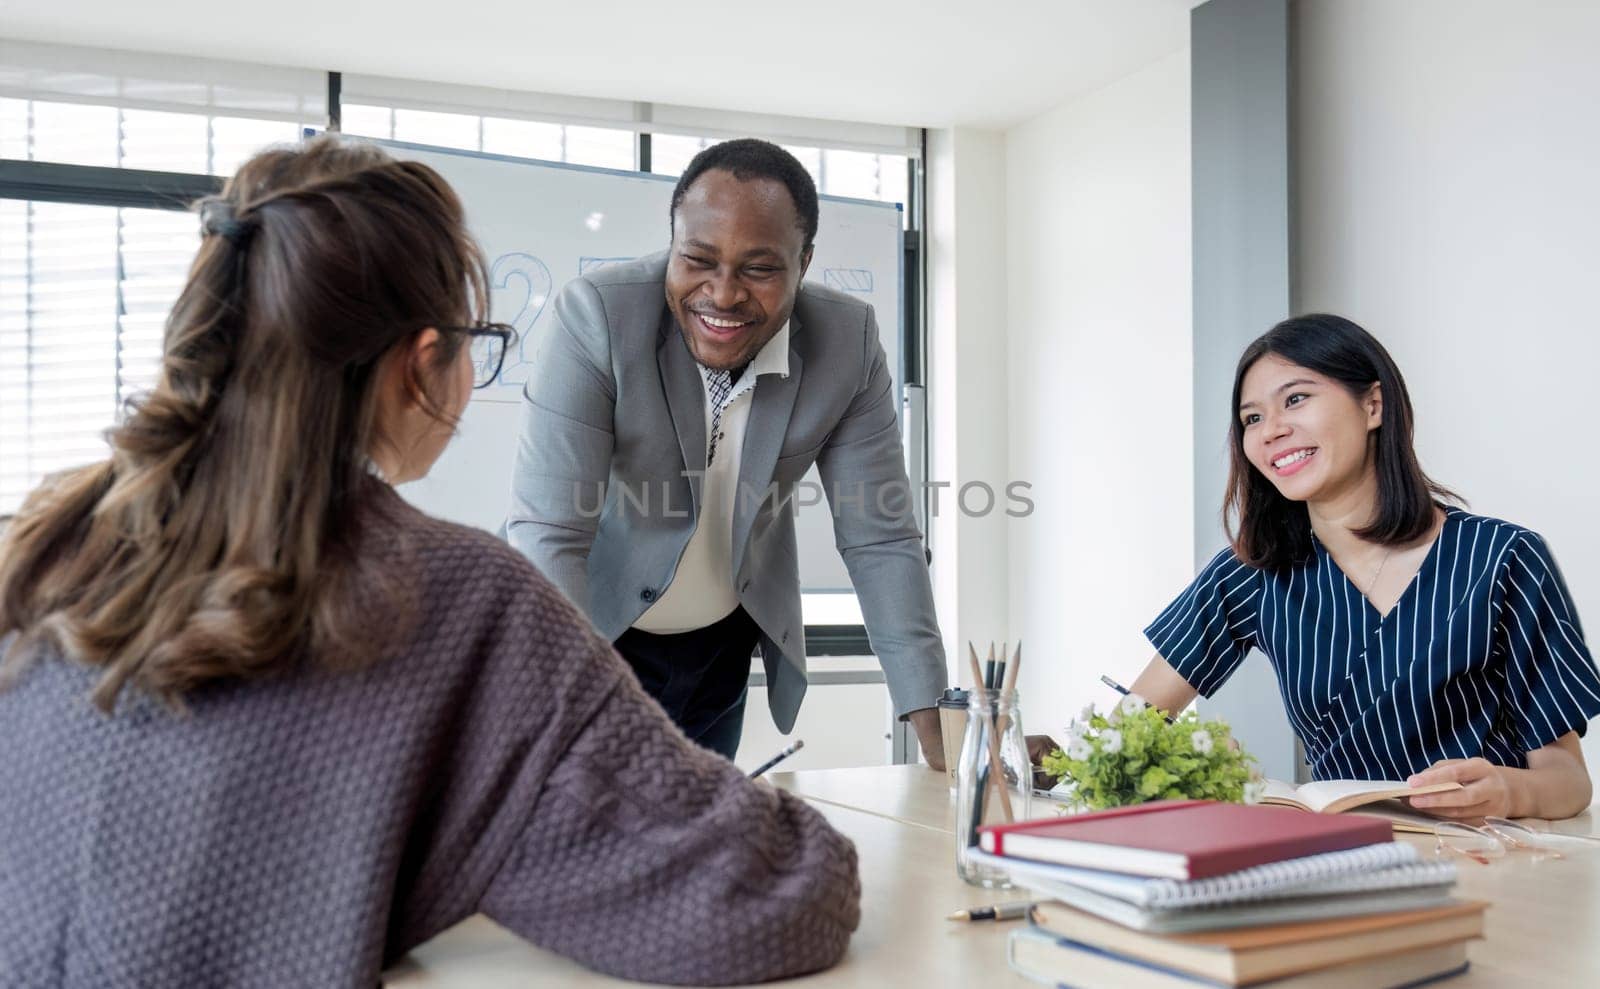 Business People Meeting using laptop computer,calculator,notebook,stock market chart paper for analysis Plans to improve quality next month. Conference Discussion Corporate Concept...